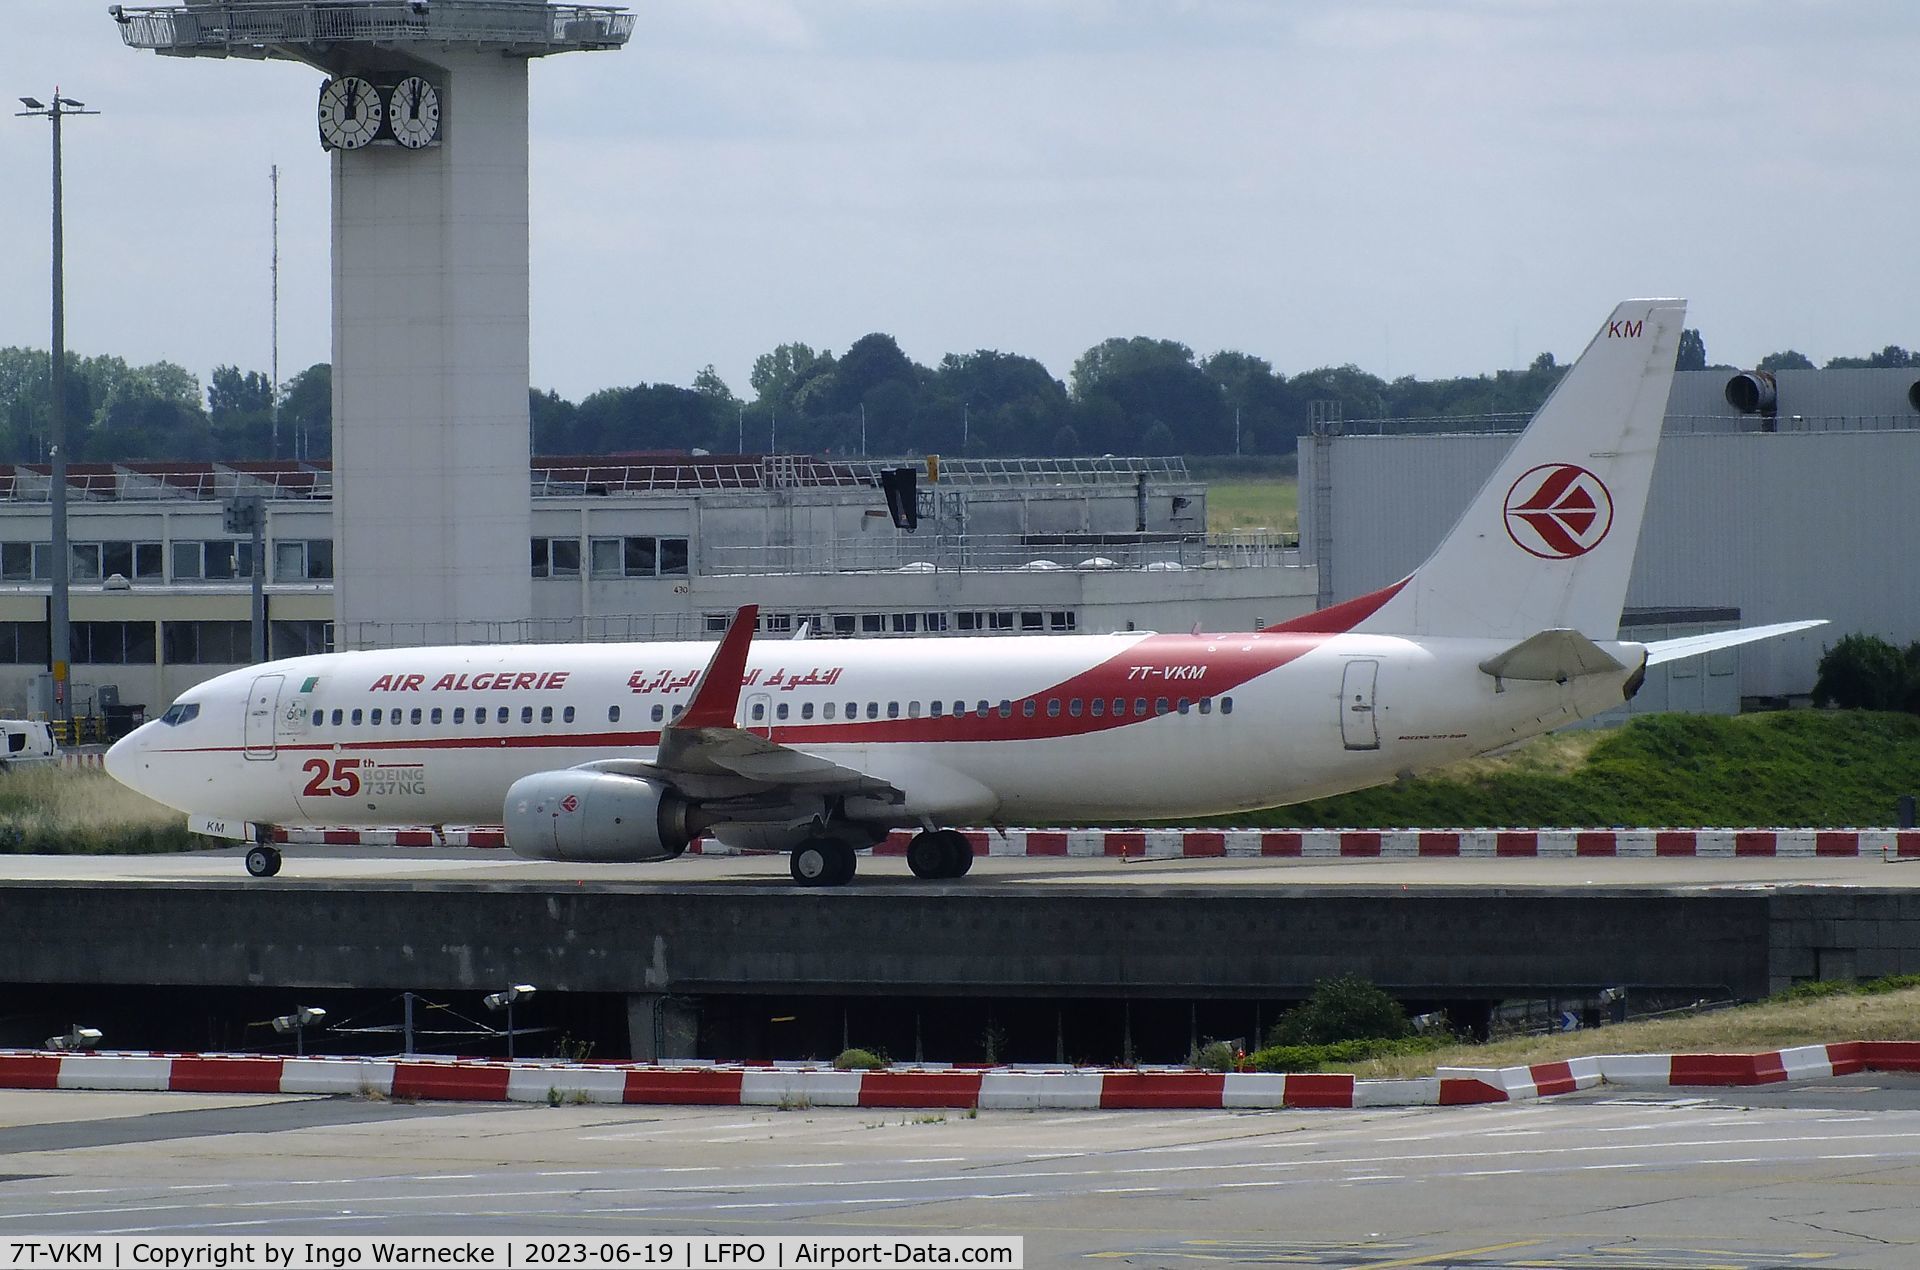 7T-VKM, 2016 Boeing 737-8D6 C/N 60749, Boeing 737-8D6 of Air Algerie at Paris/Orly airport